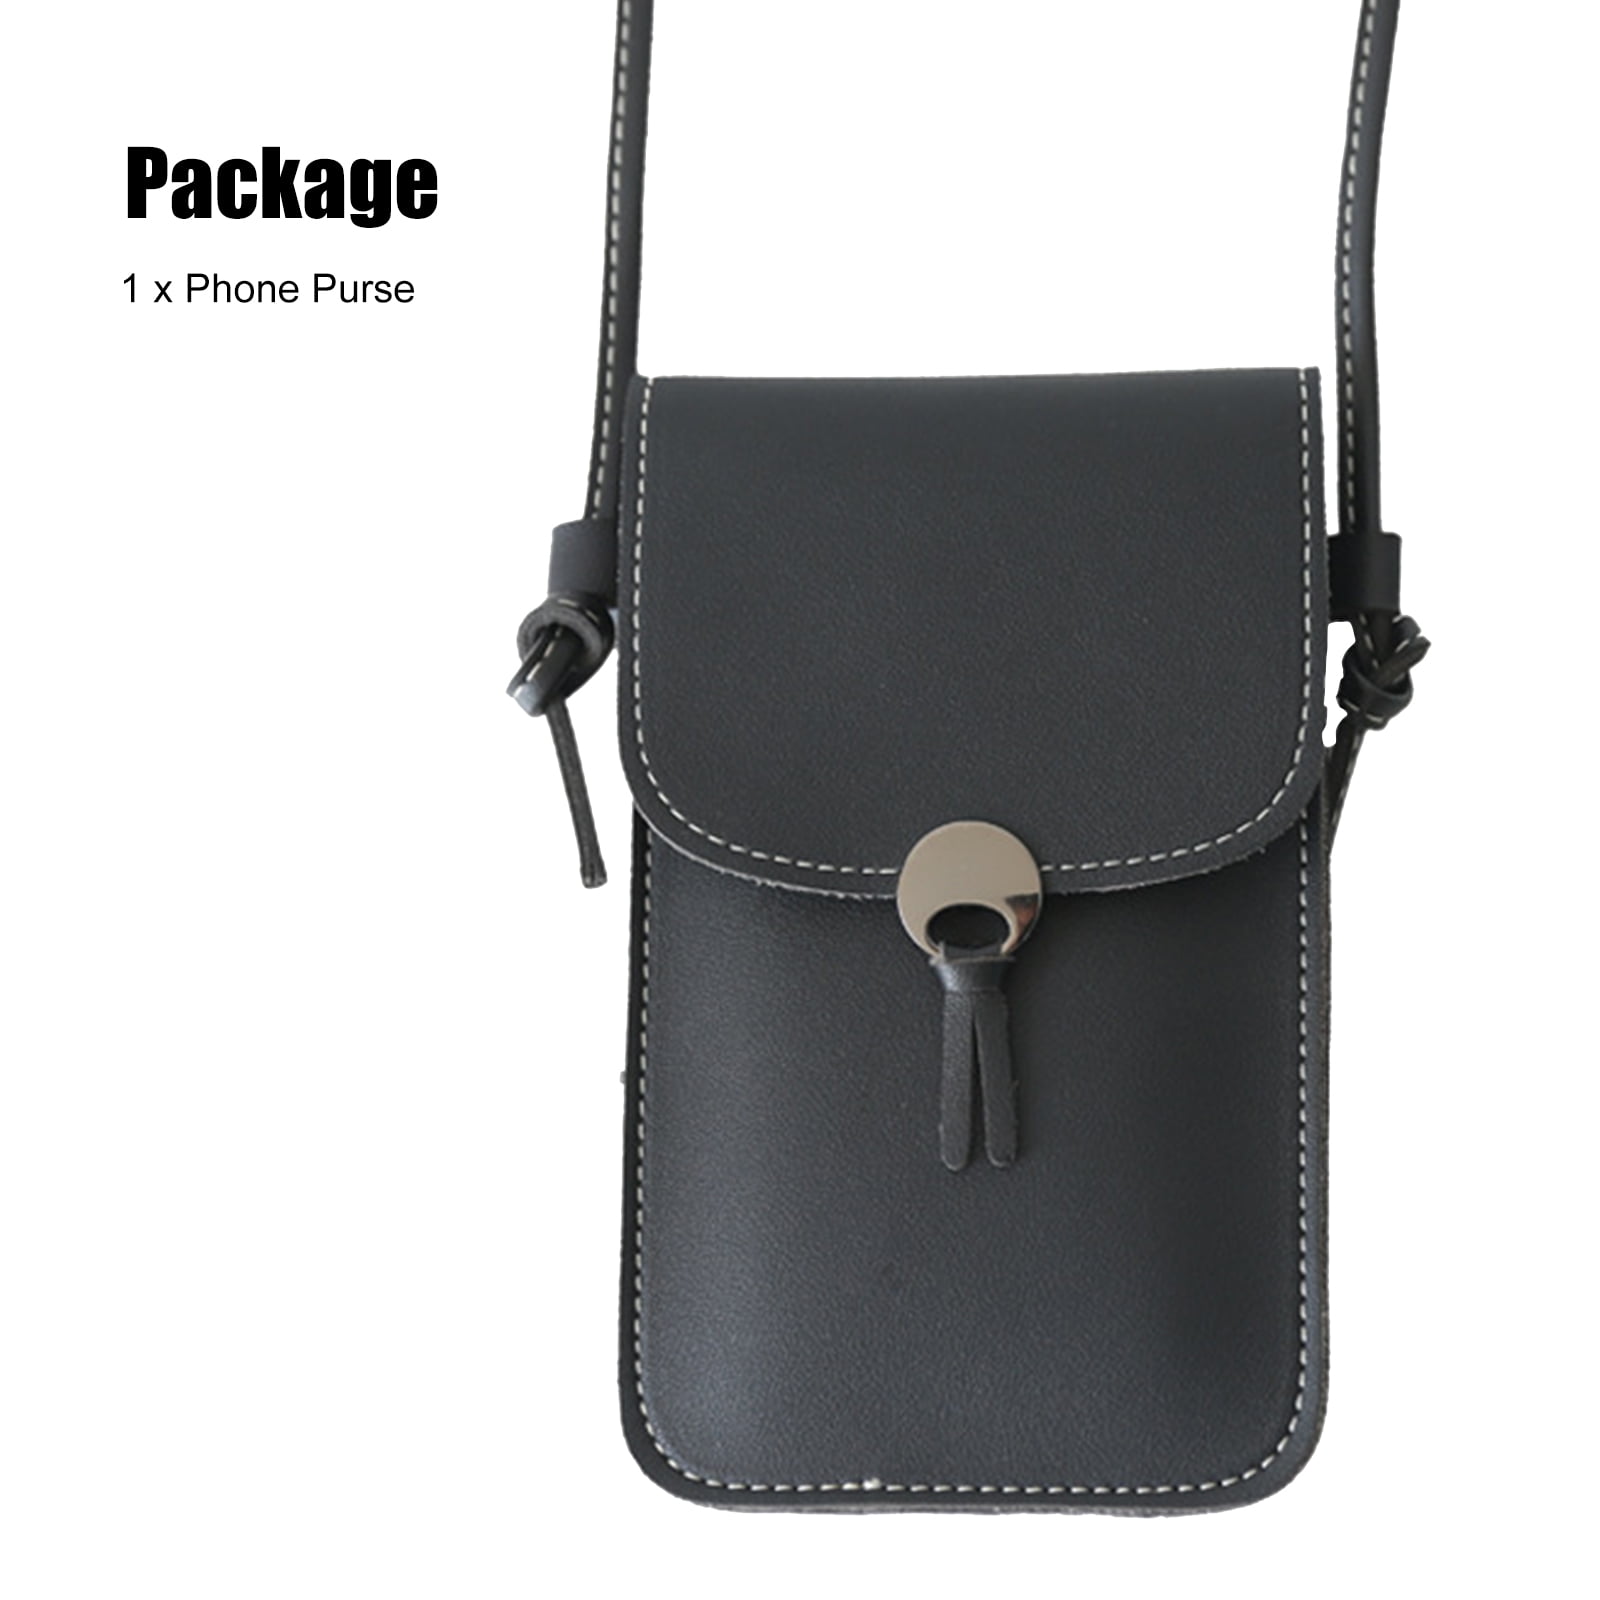 Cannabis leaf Small Crossbody Bag Cell Phone Purse Smartphone Wallet with Shoulder Strap Handbag for Women 